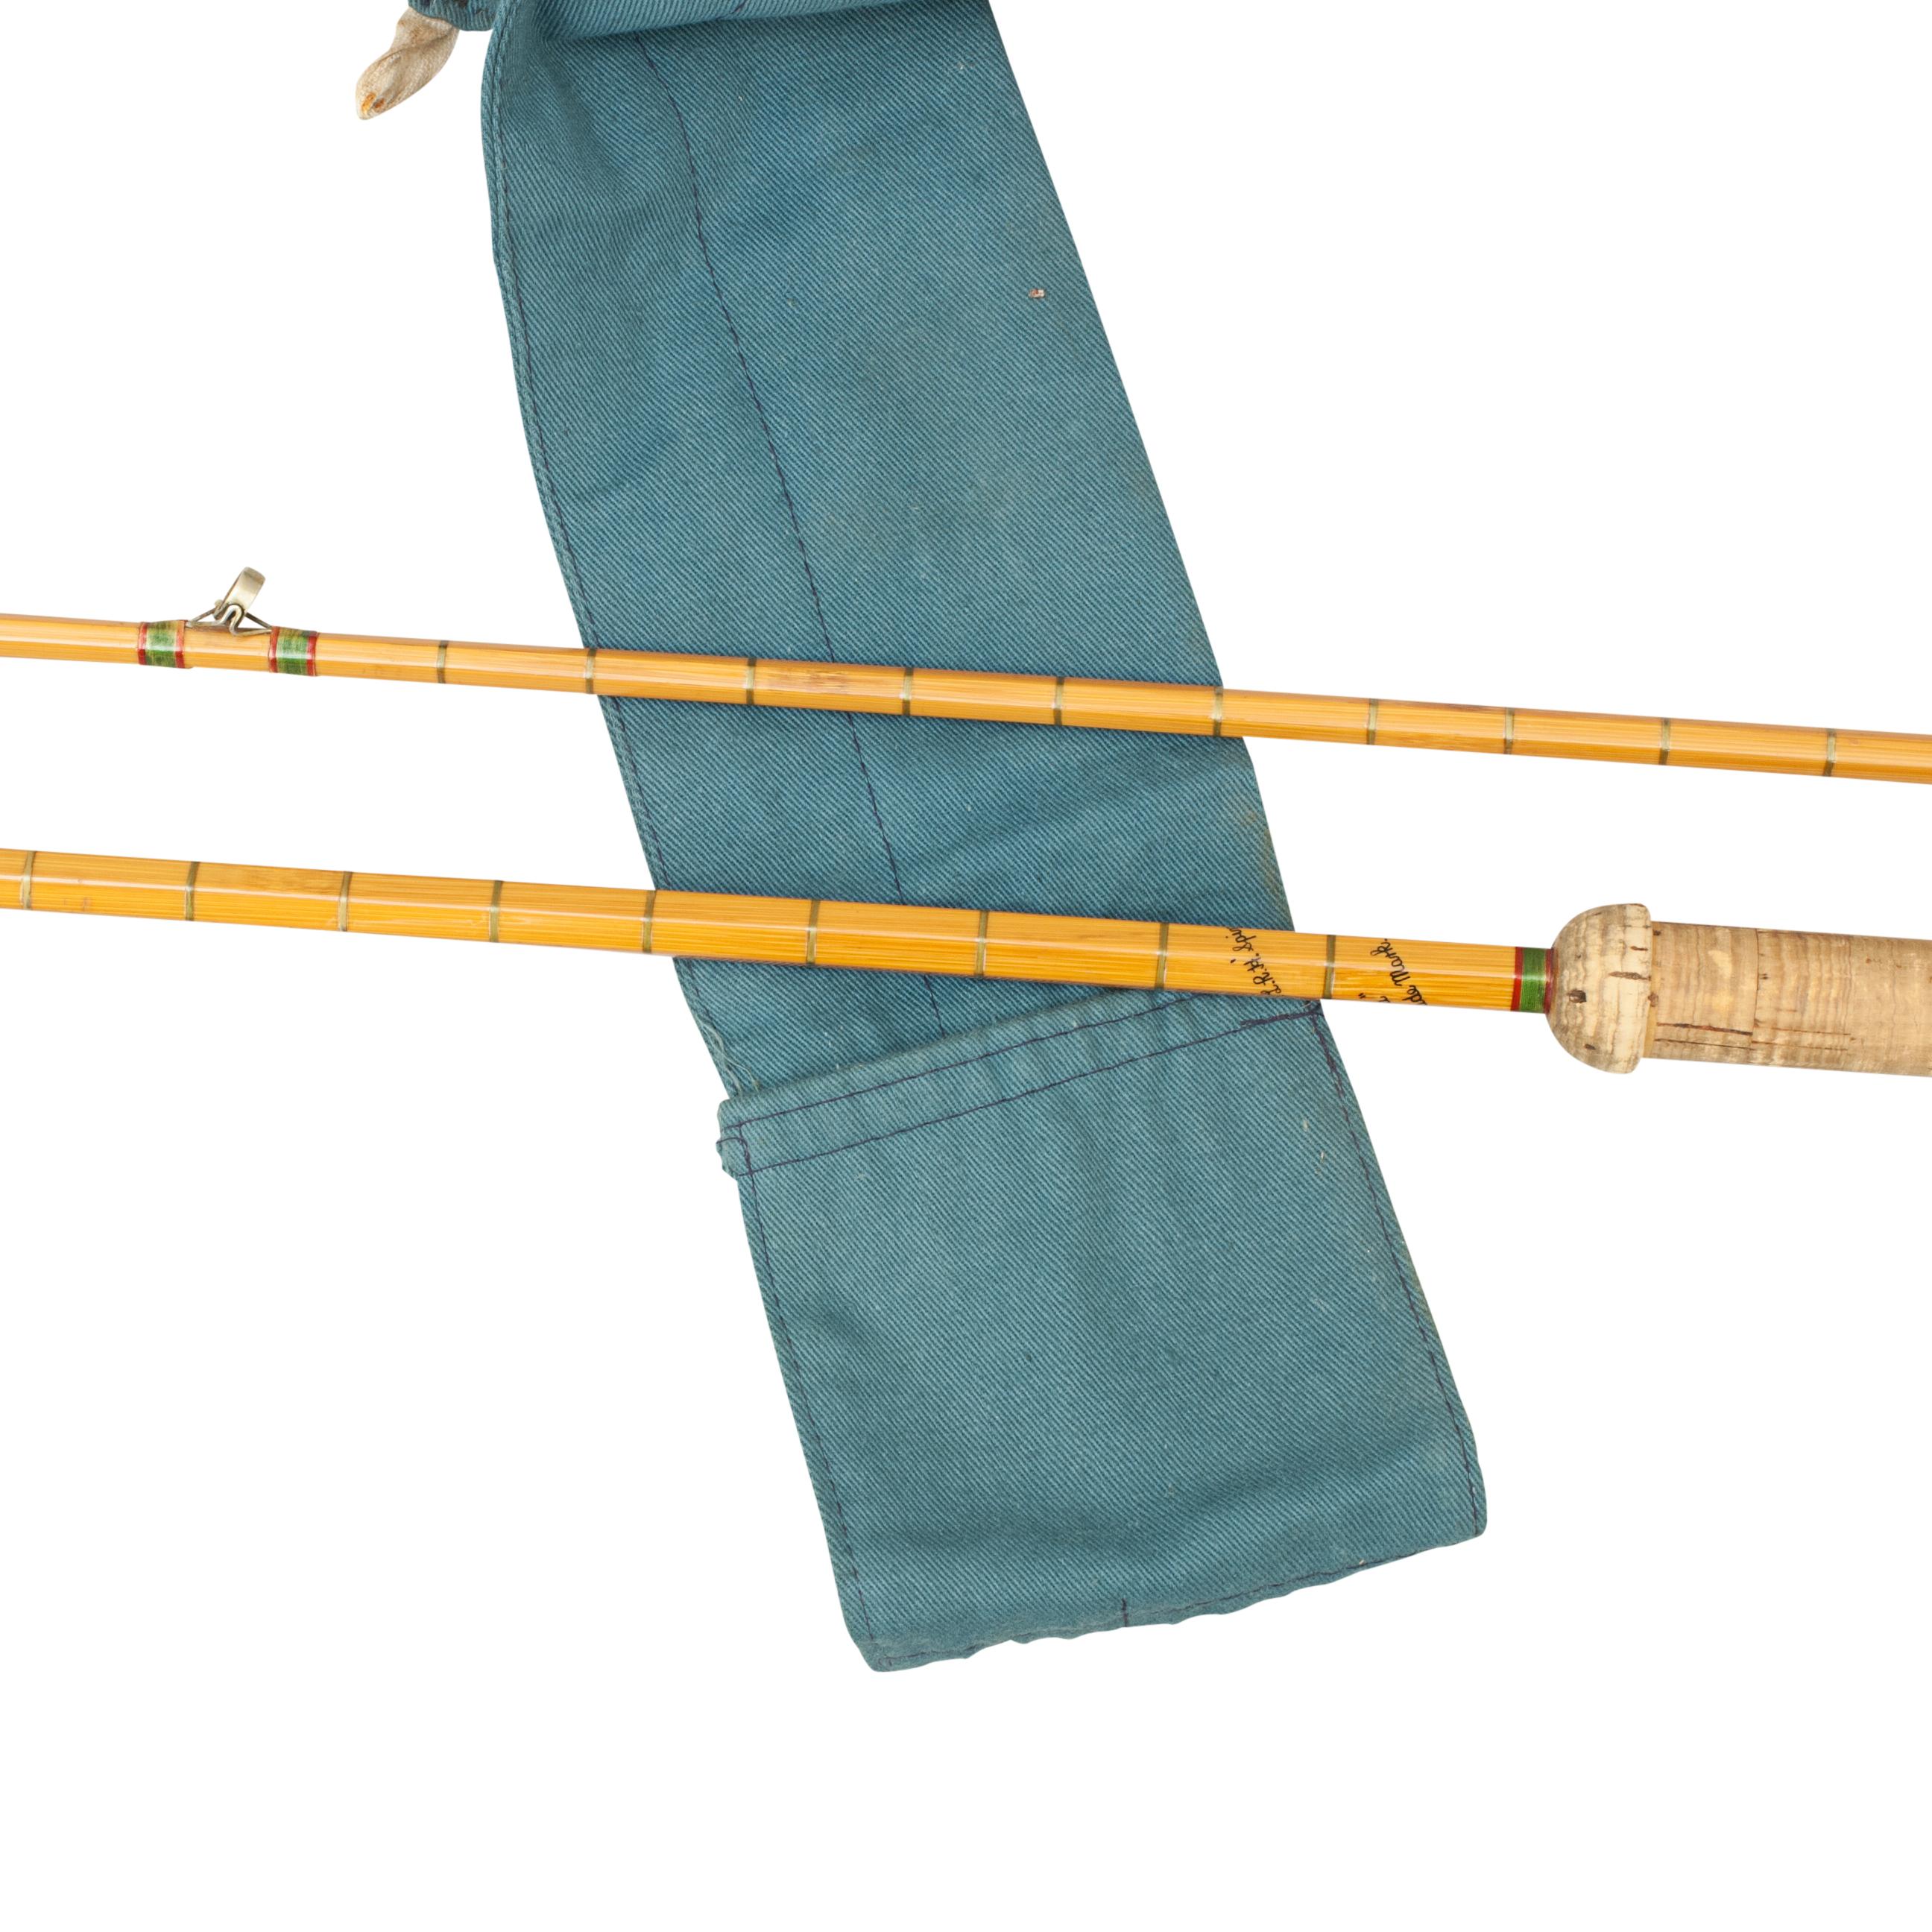 Hardy 'L.R.H. Spinning Rod'.
A very good double-handed Hardy No.1 L.R.H Palakona split cane spinning rod by Hardy Bros. of Alnwick. This is a good 9ft 6 inches long 2-piece rod with clear agate line guides. The rod is in good condition with a